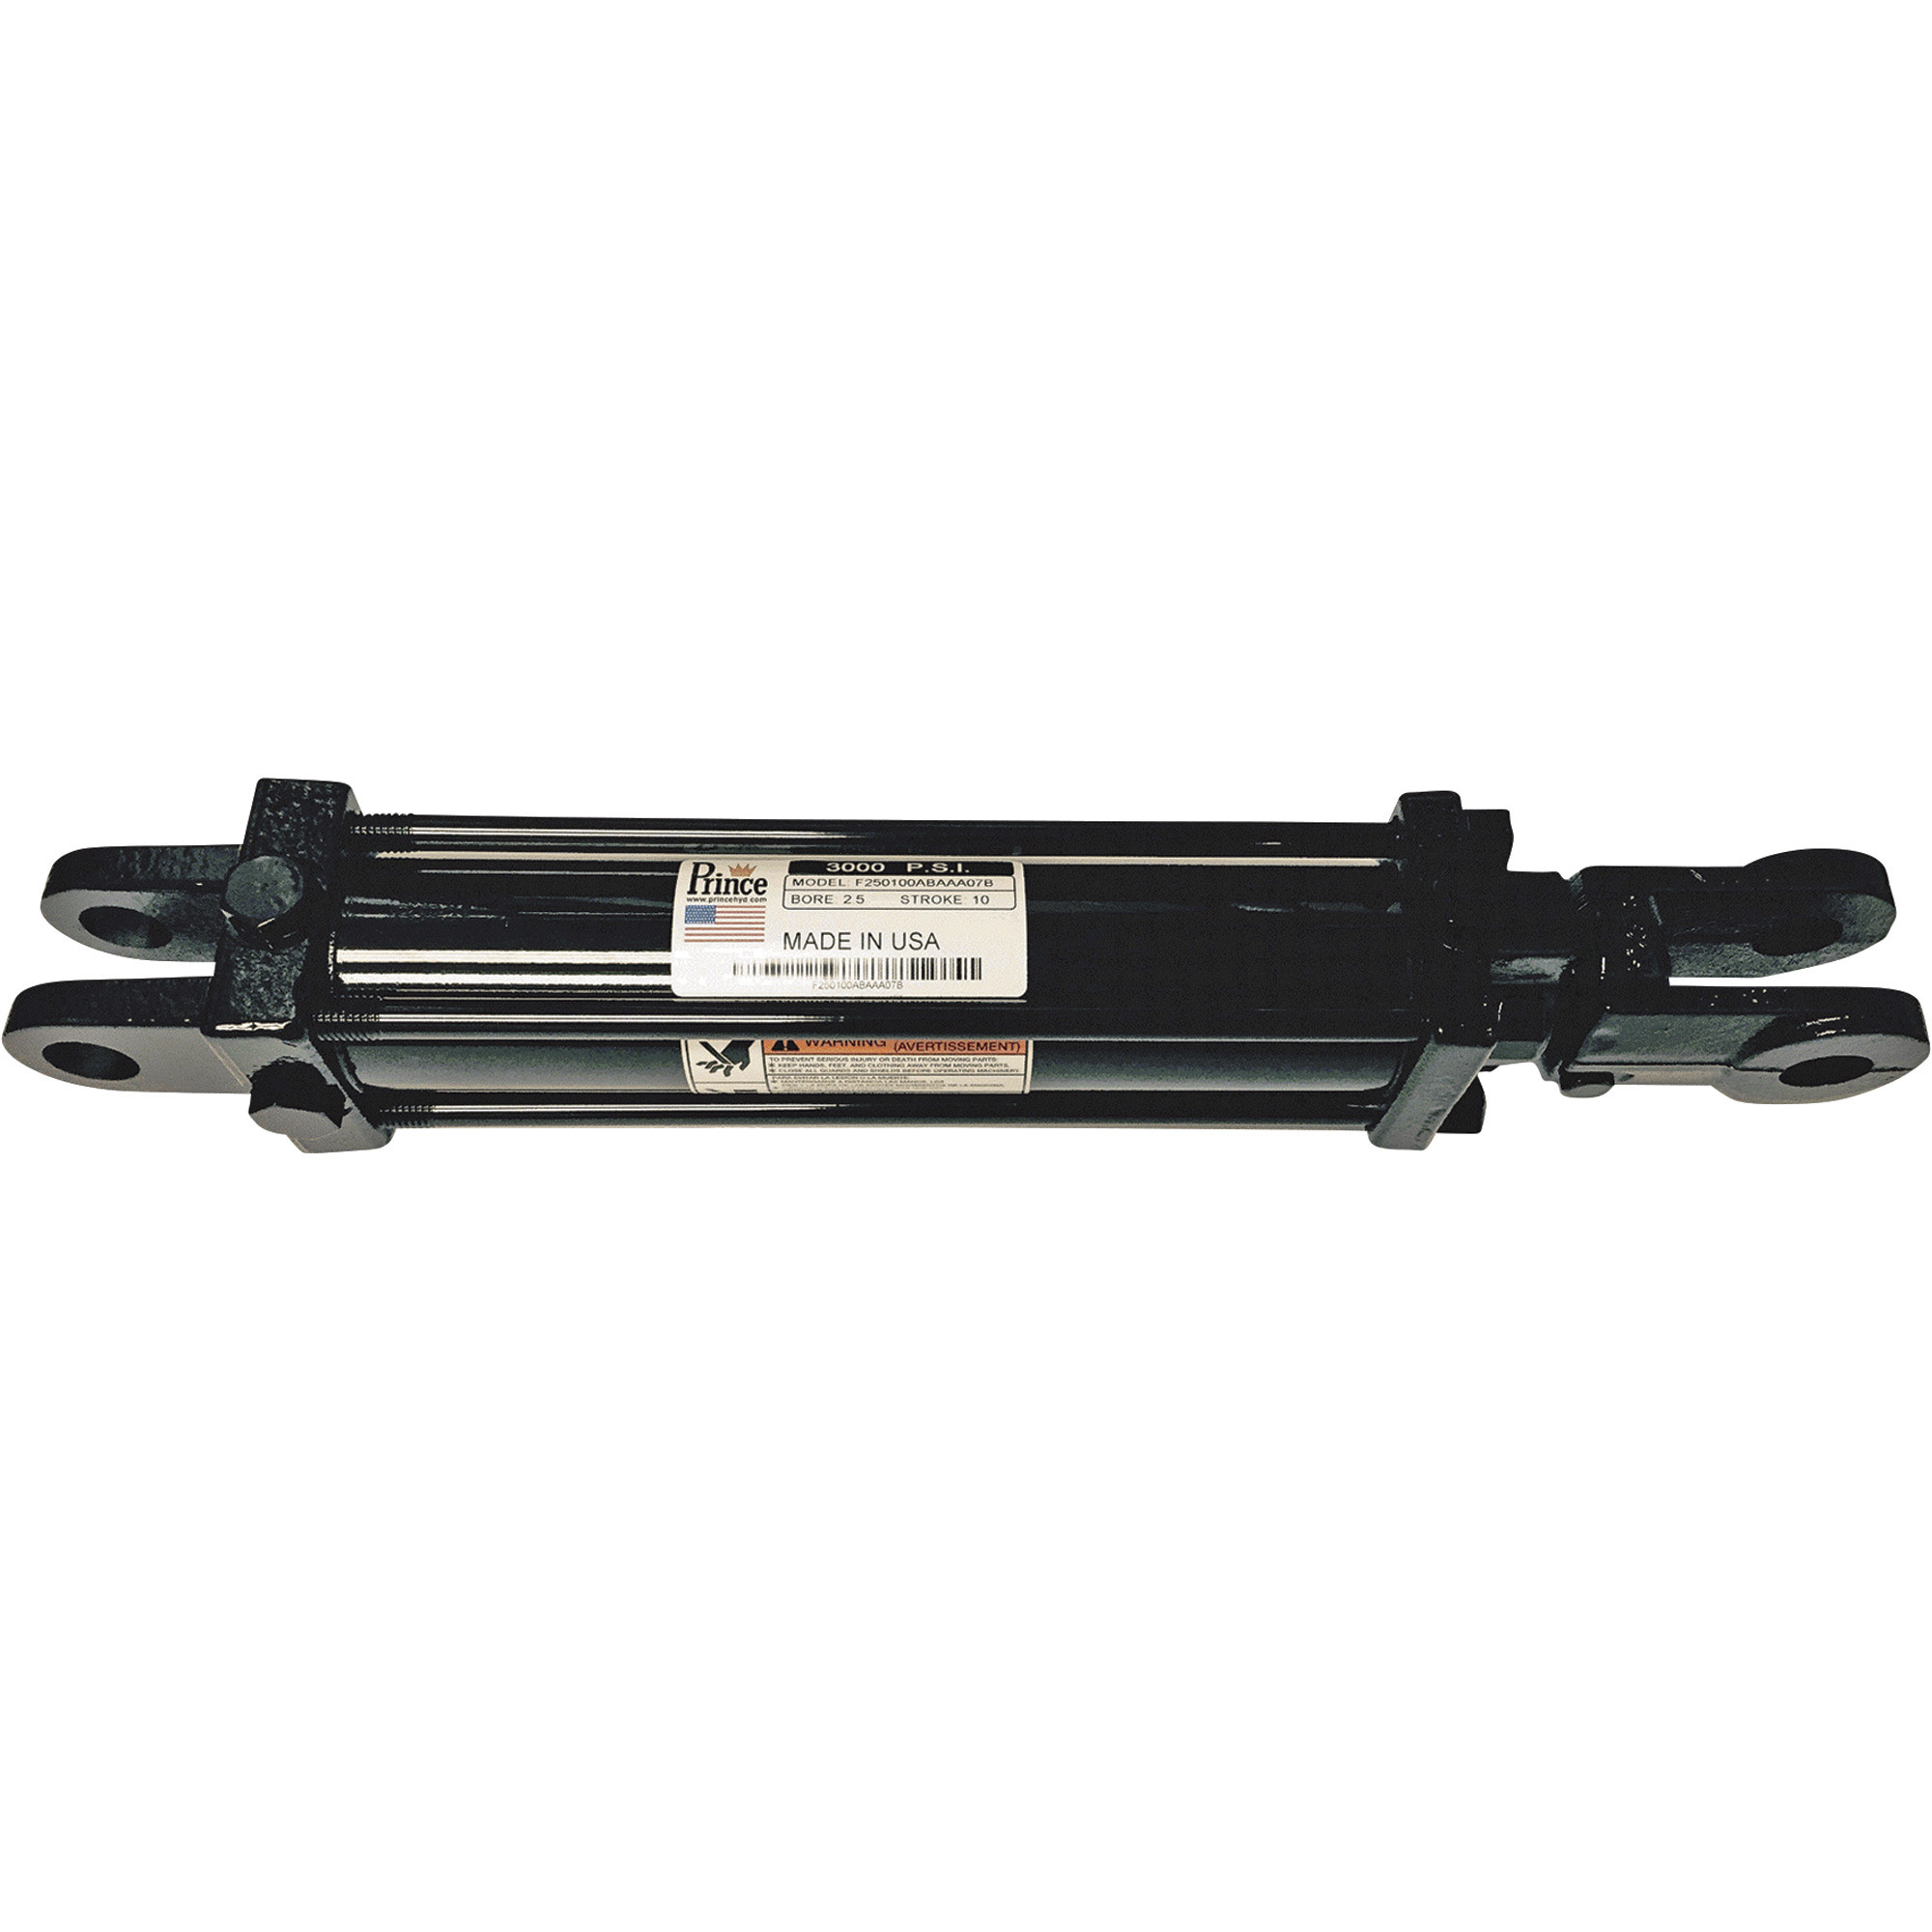 Prince Double-Acting Tie-Rod Hydraulic Cylinder â 2,500 PSI, 3Inch Bore, 8Inch Stroke, 1 1/8Inch Shaft